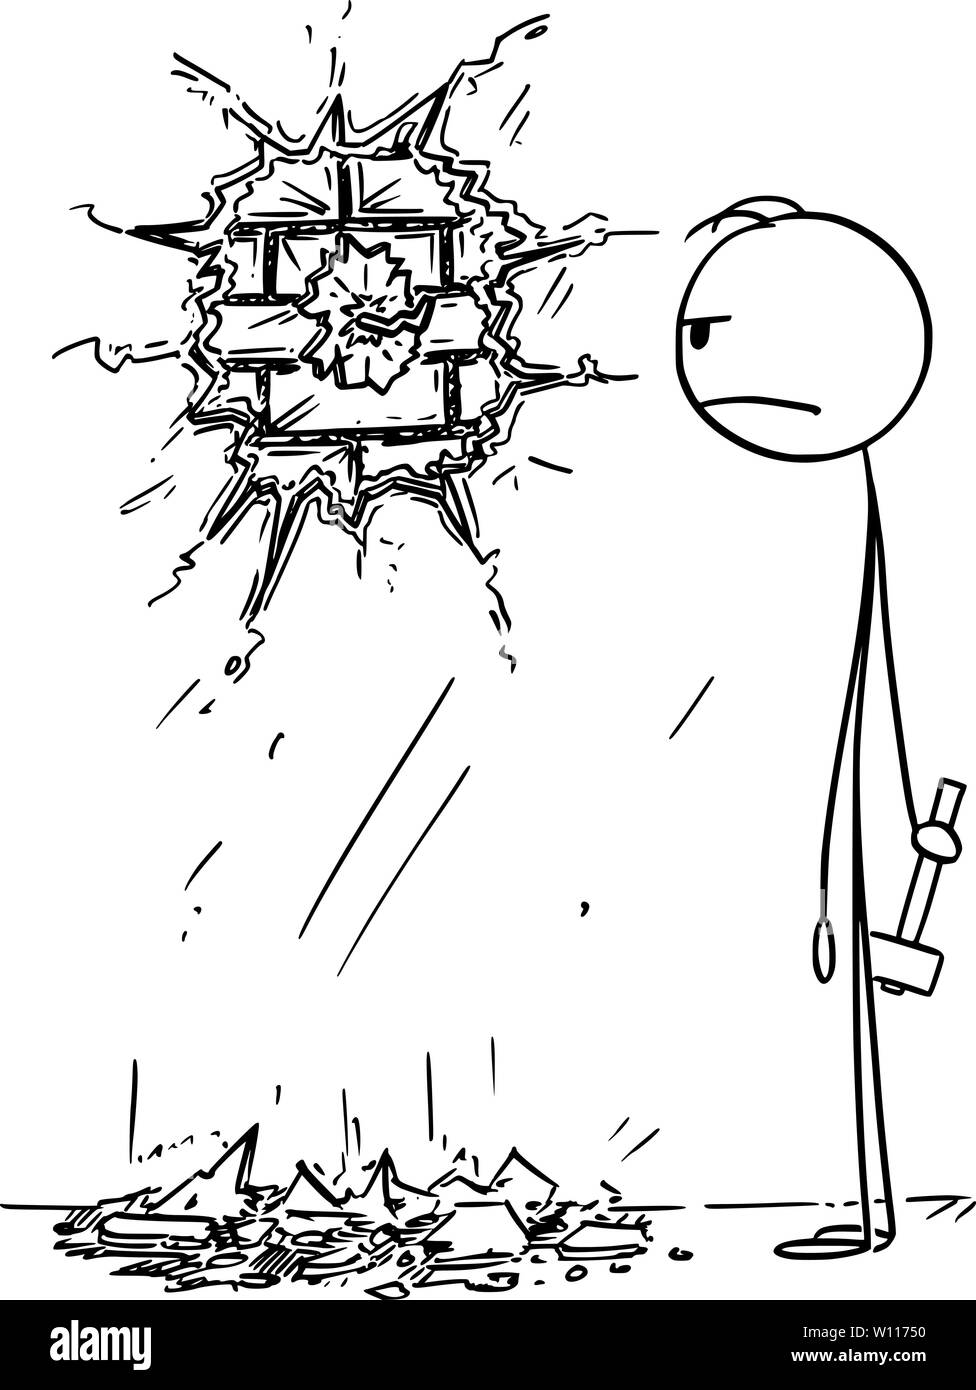 Vector cartoon stick figure drawing conceptual illustration of clumsy angry man, who destroyed the wall or plaster while tried to hammer or knock a nail or hook in to wall. Stock Vector